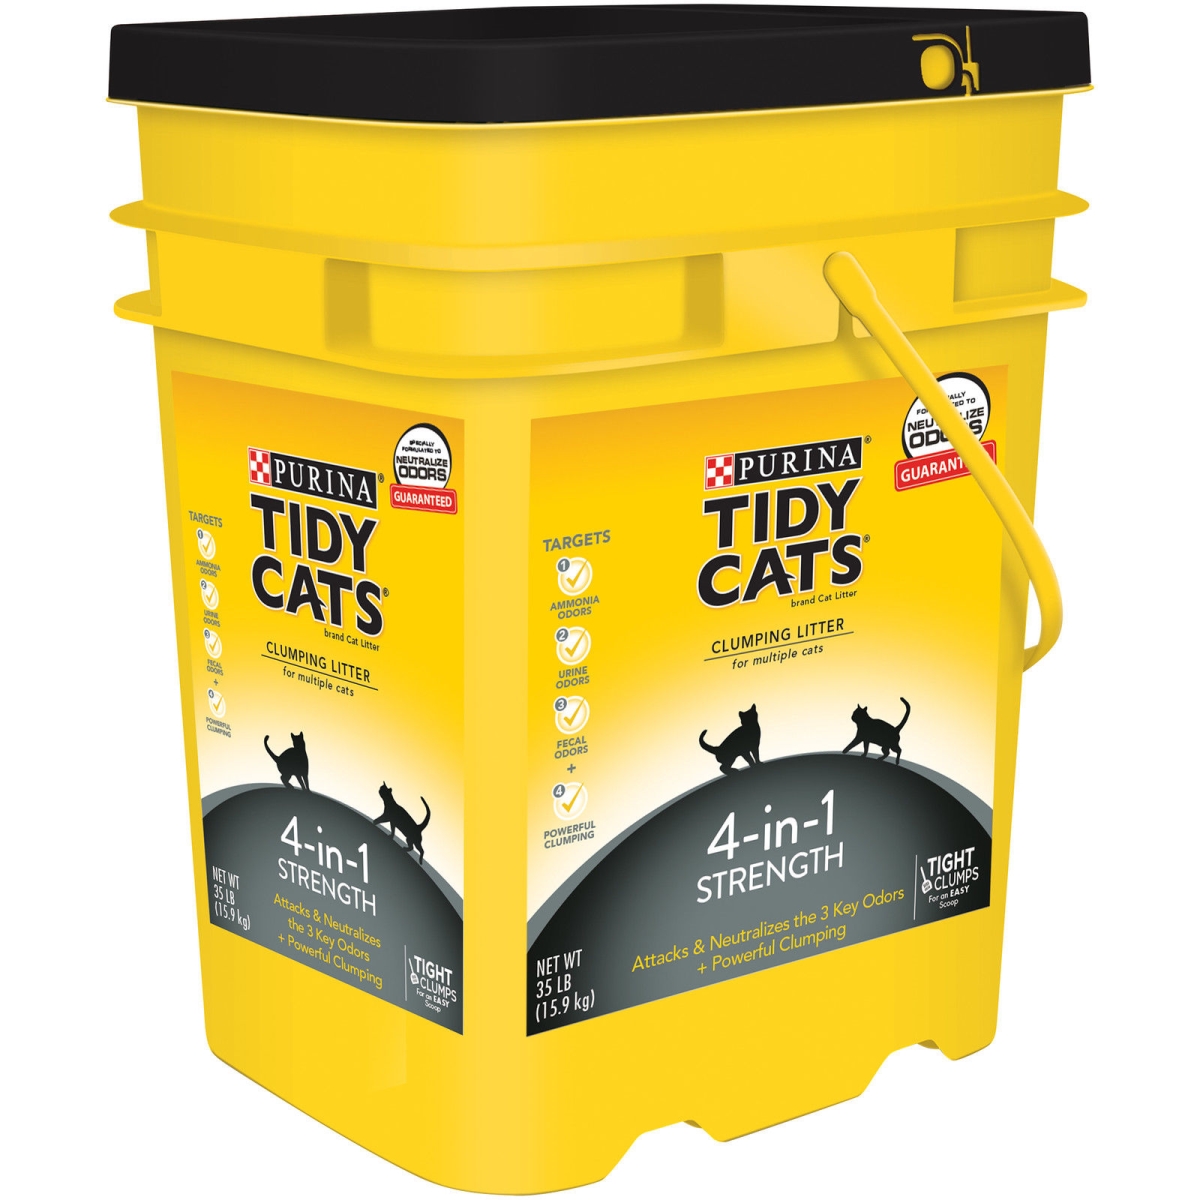 Goldc 702052 35 Litretidy Cats Clumping Litter 4-in-1 Strength For Multiple Cats